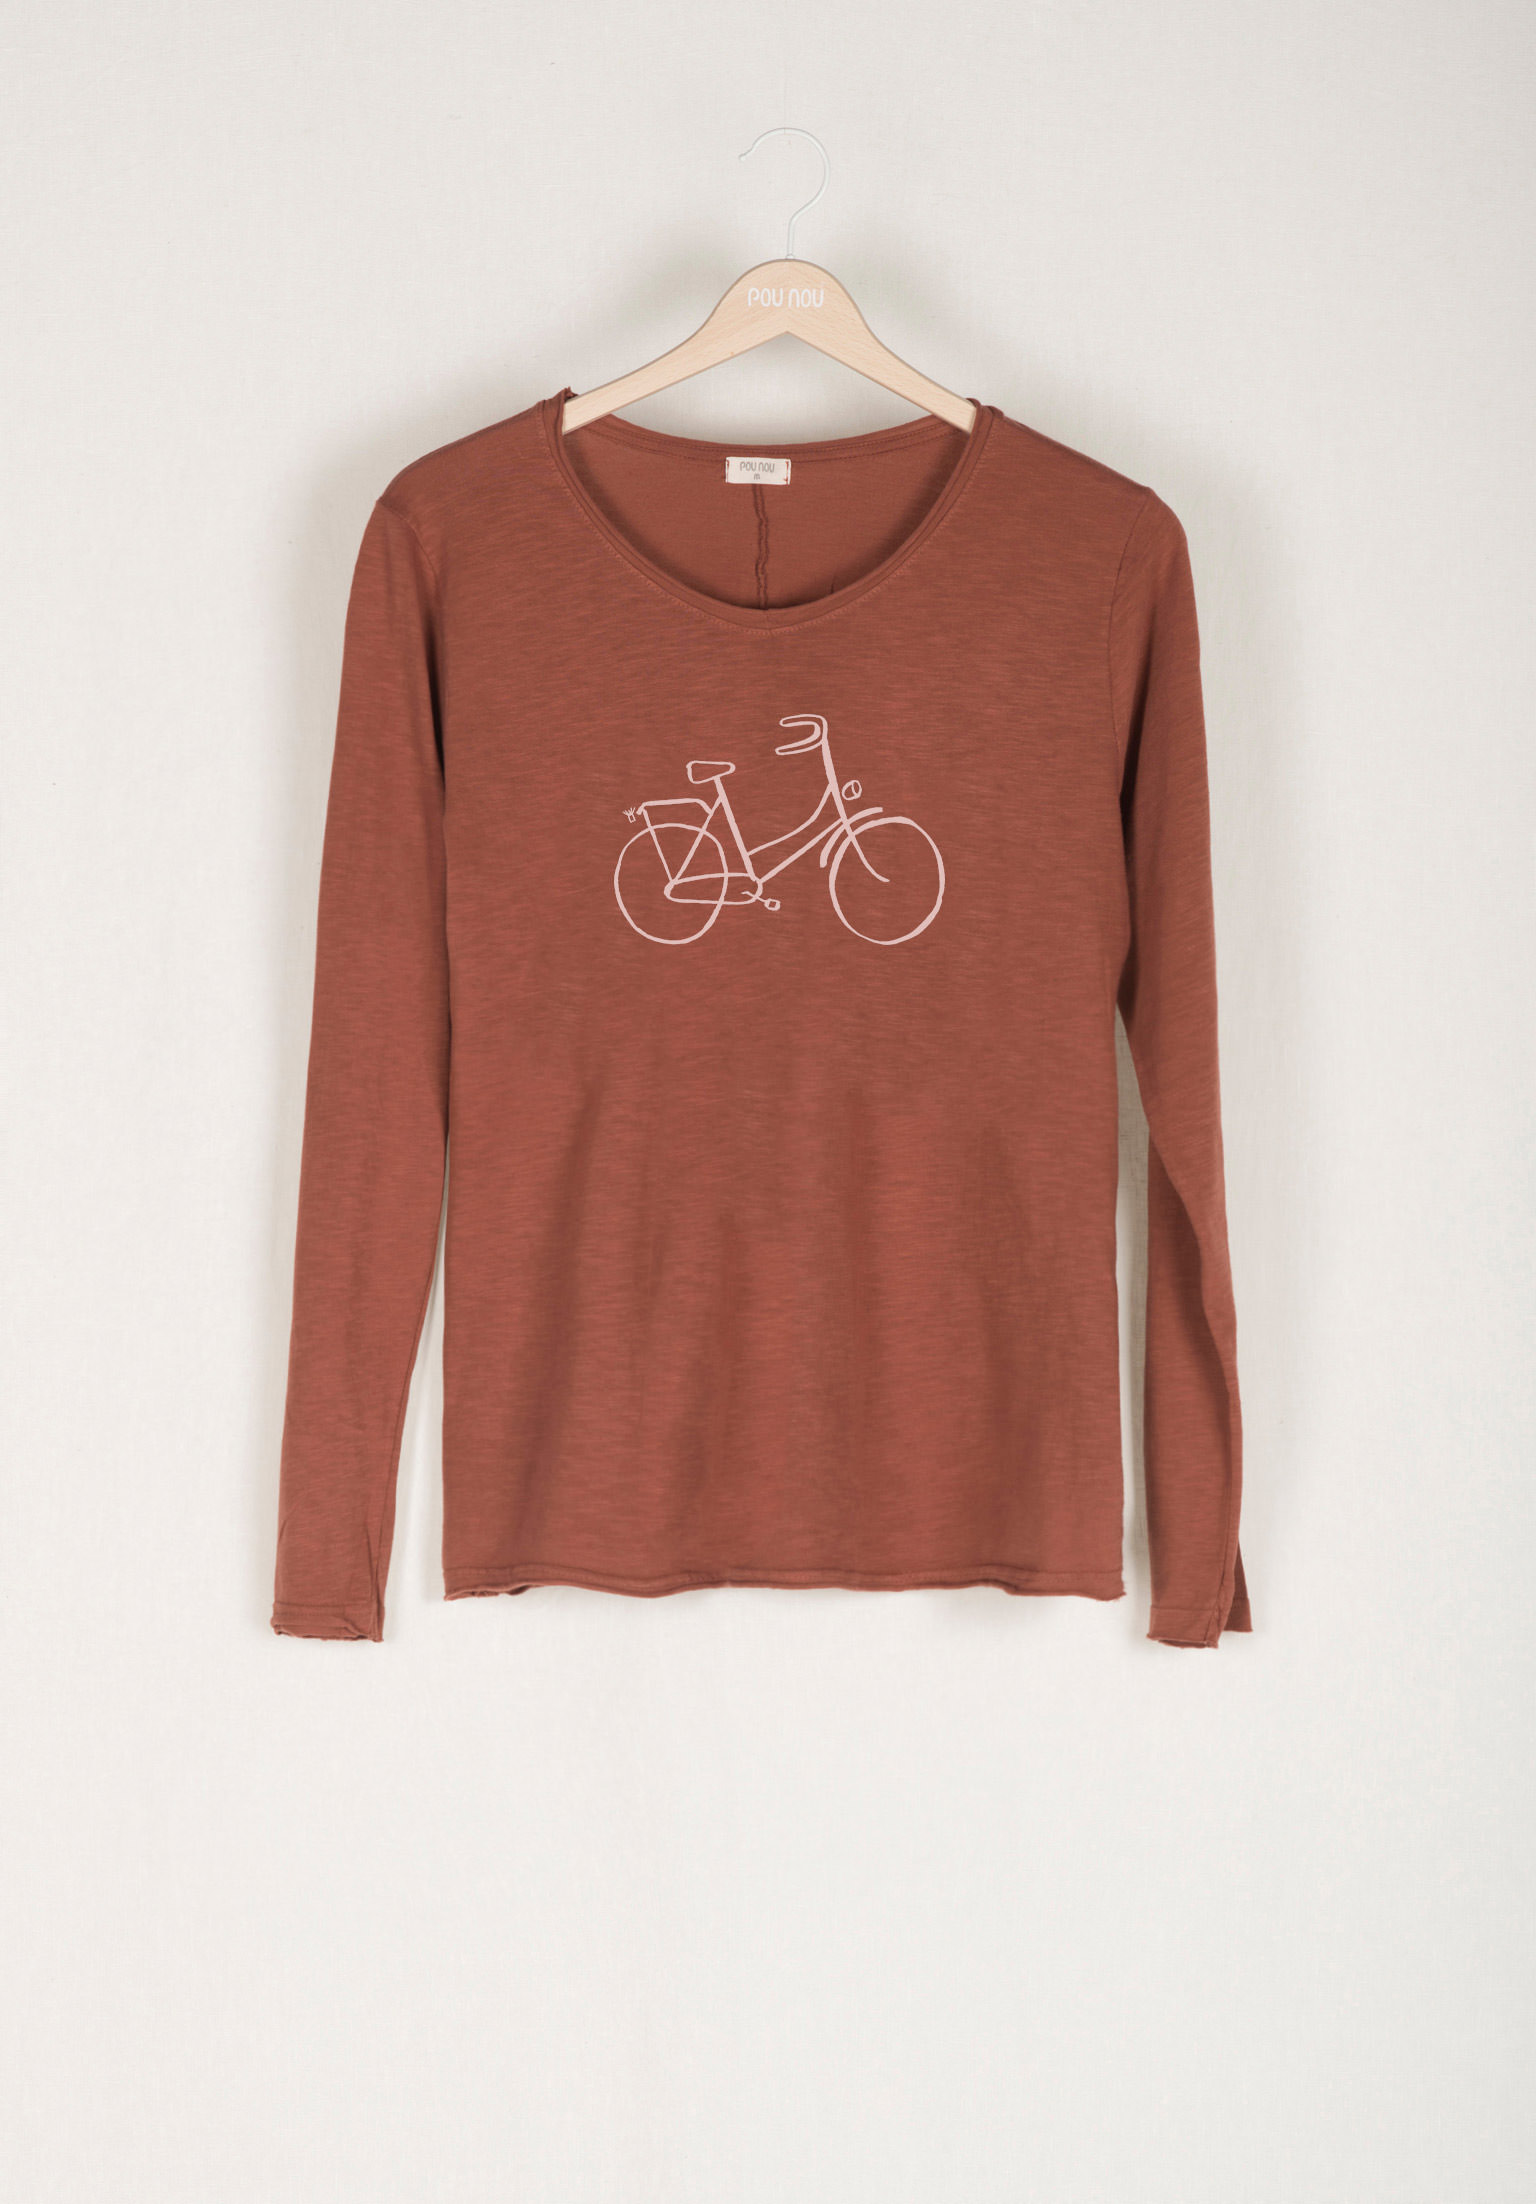 Long-sleeved cotton T-shirt happiness